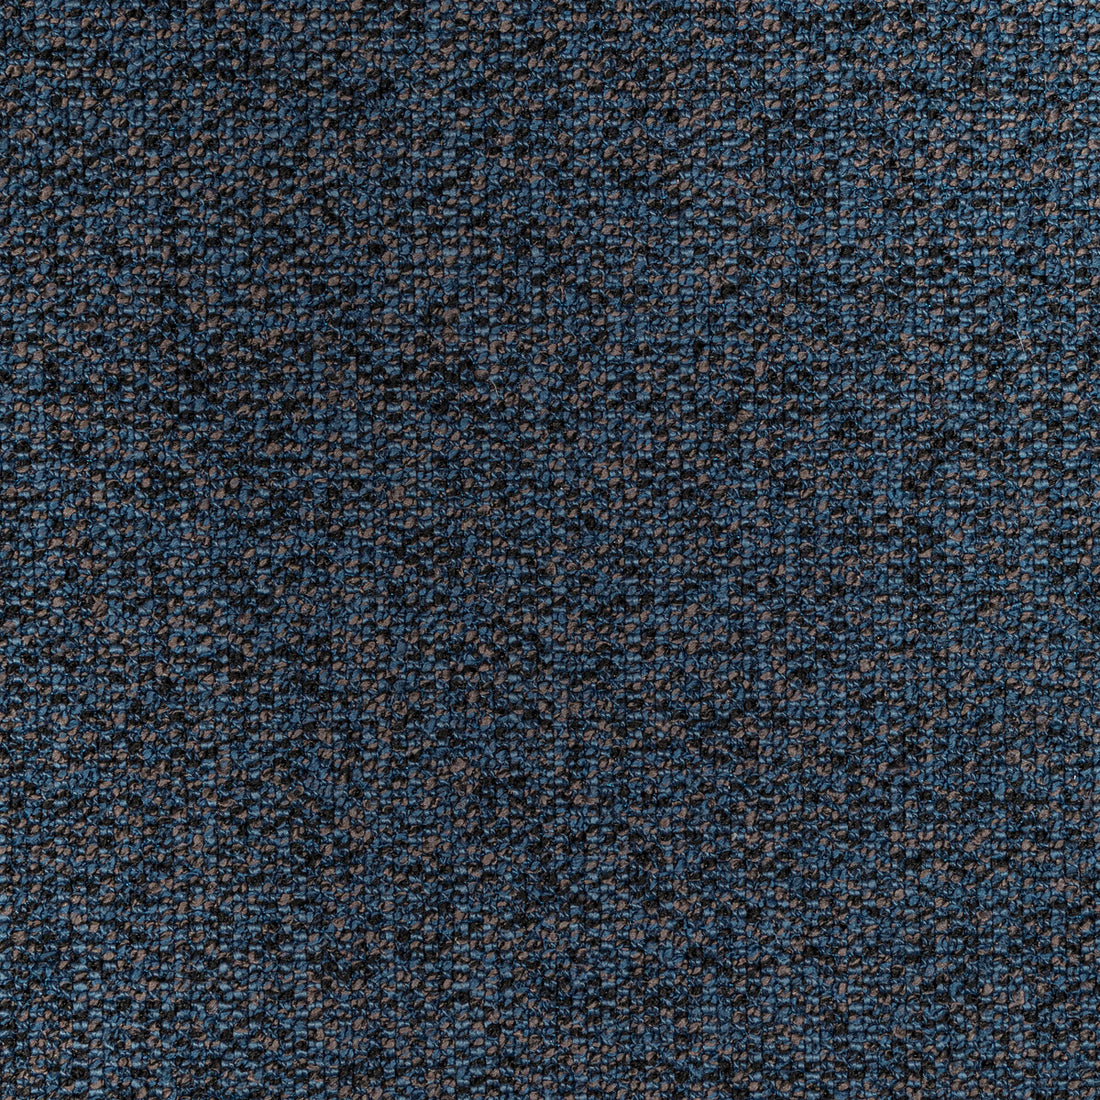 Mathis fabric in ink color - pattern 36699.50.0 - by Kravet Contract in the Refined Textures Performance Crypton collection